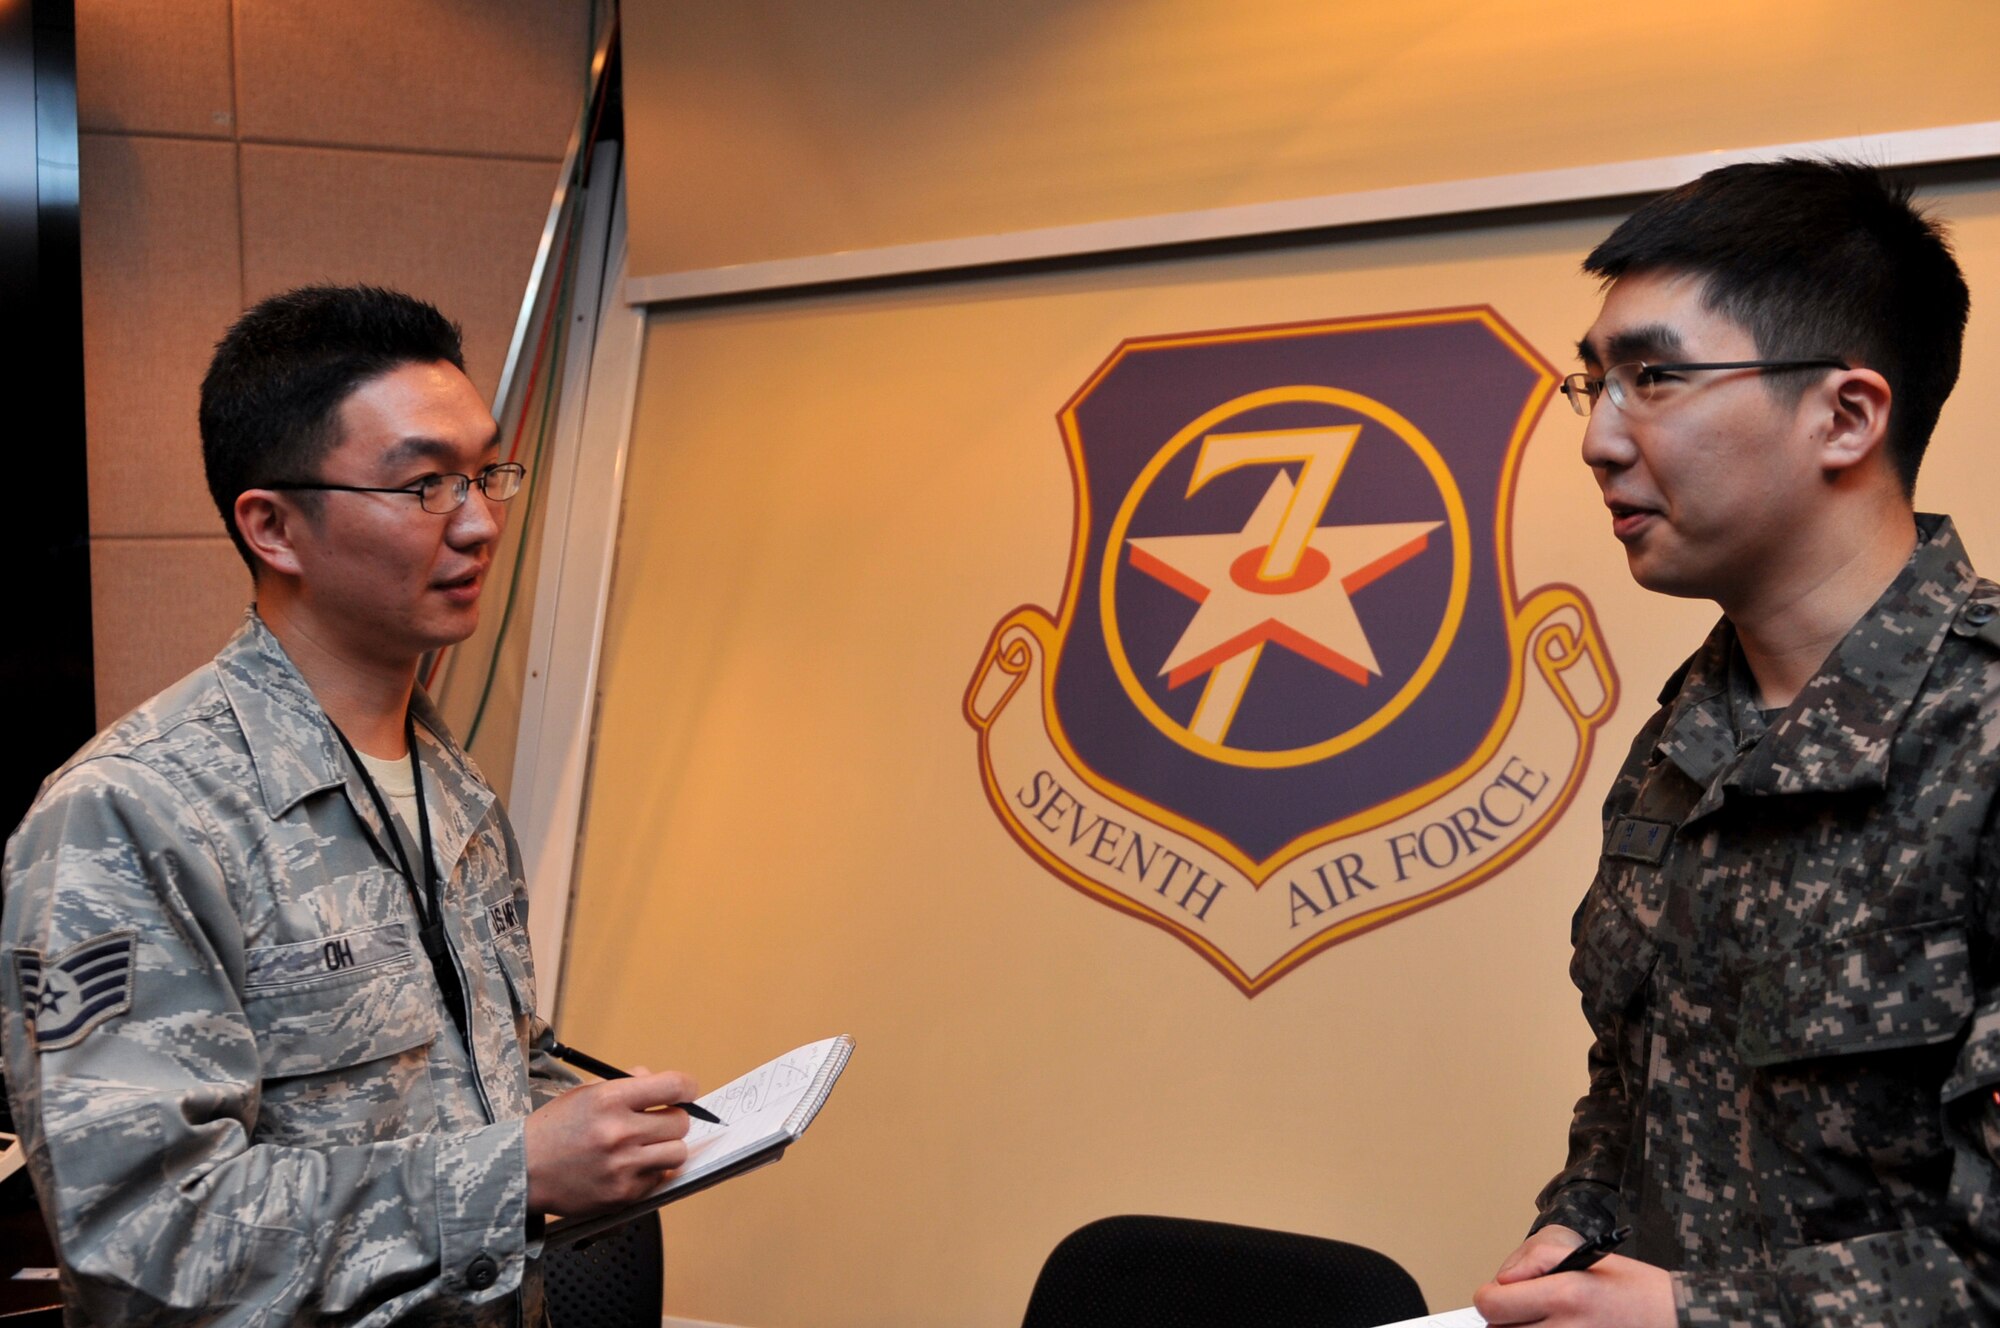 U.S. Air Force Staff Sgt. Hyo K. Oh and Republic of Korea Air Force 1st Lt. Lee, Suk-Hyung, 7th Air Force Air Component Command plans and coordination directorate senior interpreters, converse after a briefing during Exercise Key Resolve at Osan Air Base, Republic of Korea, March 20, 2013. Training exercises like Key Resolve are carried out in the spirit of the 1953 ROK-U.S. Mutual Defense Treaty. These exercises highlight the longstanding partnership and enduring friendship between the United Nations Command sending state nations, help ensure peace and security on the peninsula, and reaffirm the U.S. commitment to the region. (U.S. Air Force photo/Airman 1st Class Hailey R. Davis) 